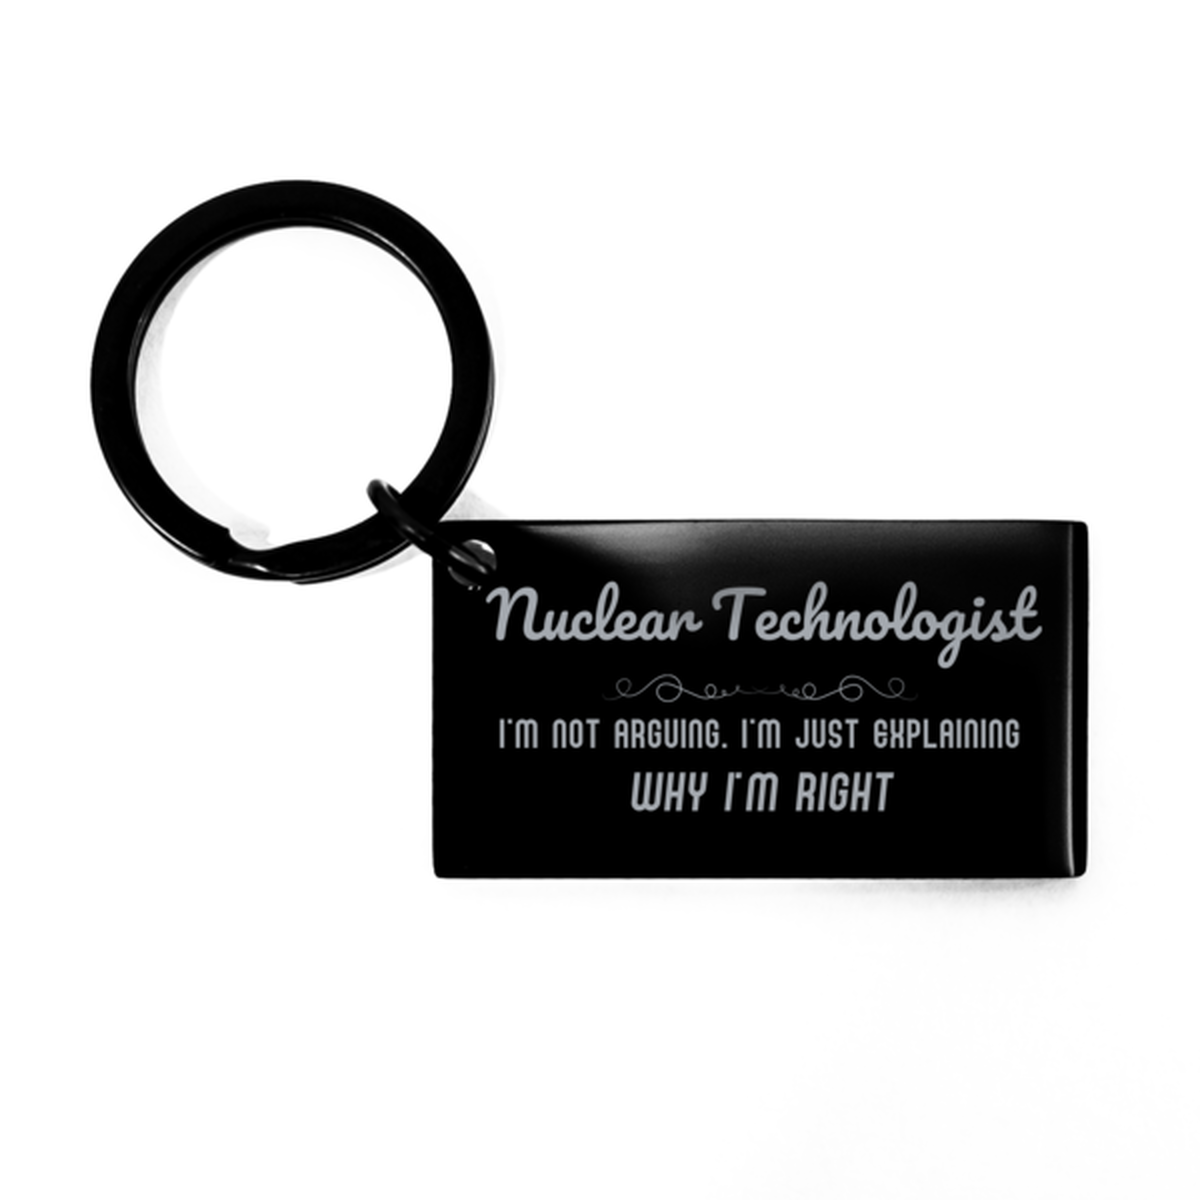 Nuclear Technologist I'm not Arguing. I'm Just Explaining Why I'm RIGHT Keychain, Funny Saying Quote Nuclear Technologist Gifts For Nuclear Technologist Graduation Birthday Christmas Gifts for Men Women Coworker